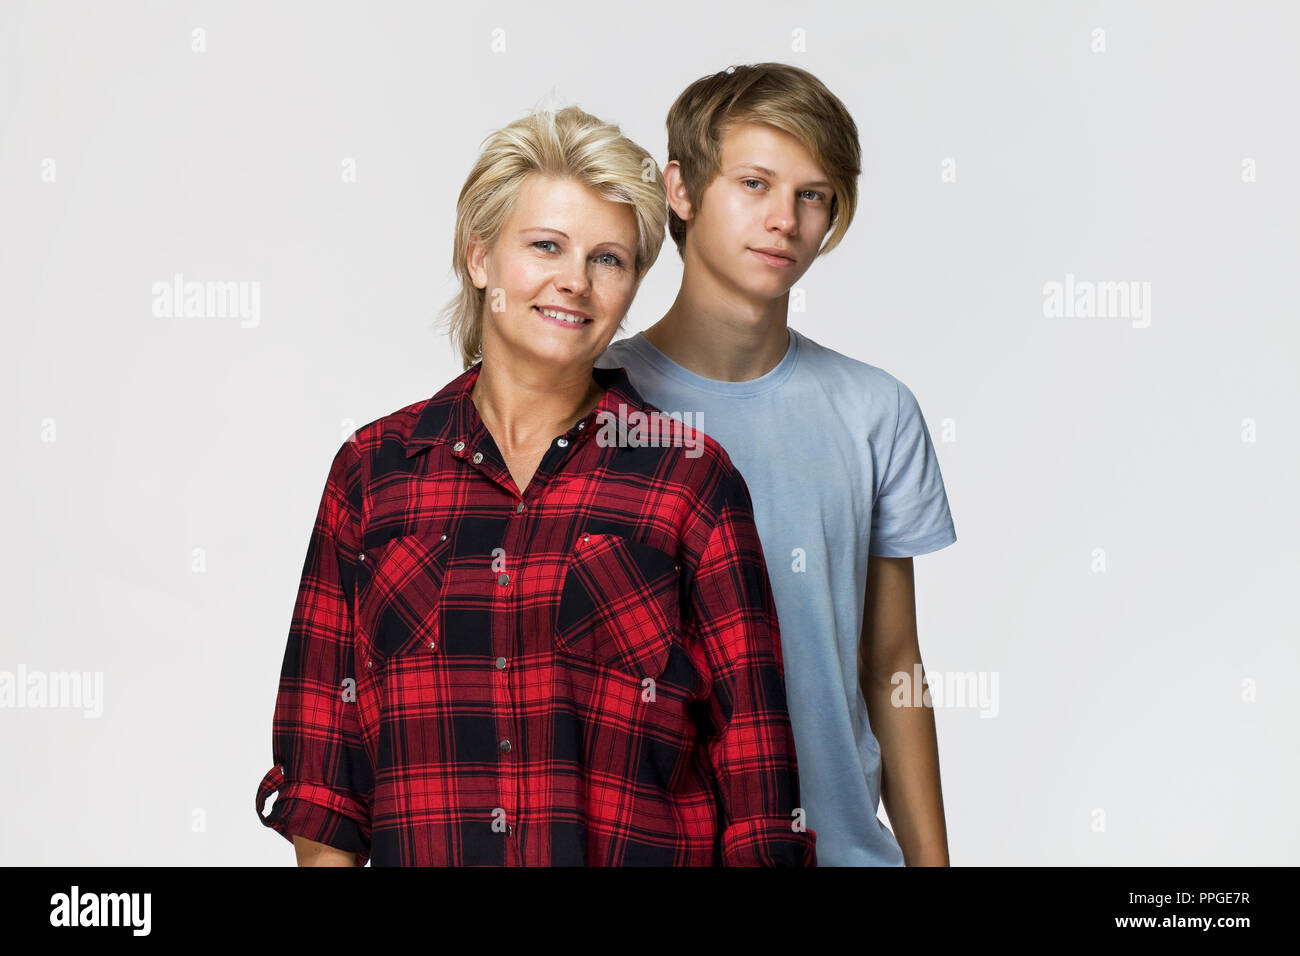 Happy and smiling mother and son. Loving family portrait against white background Stock Photo